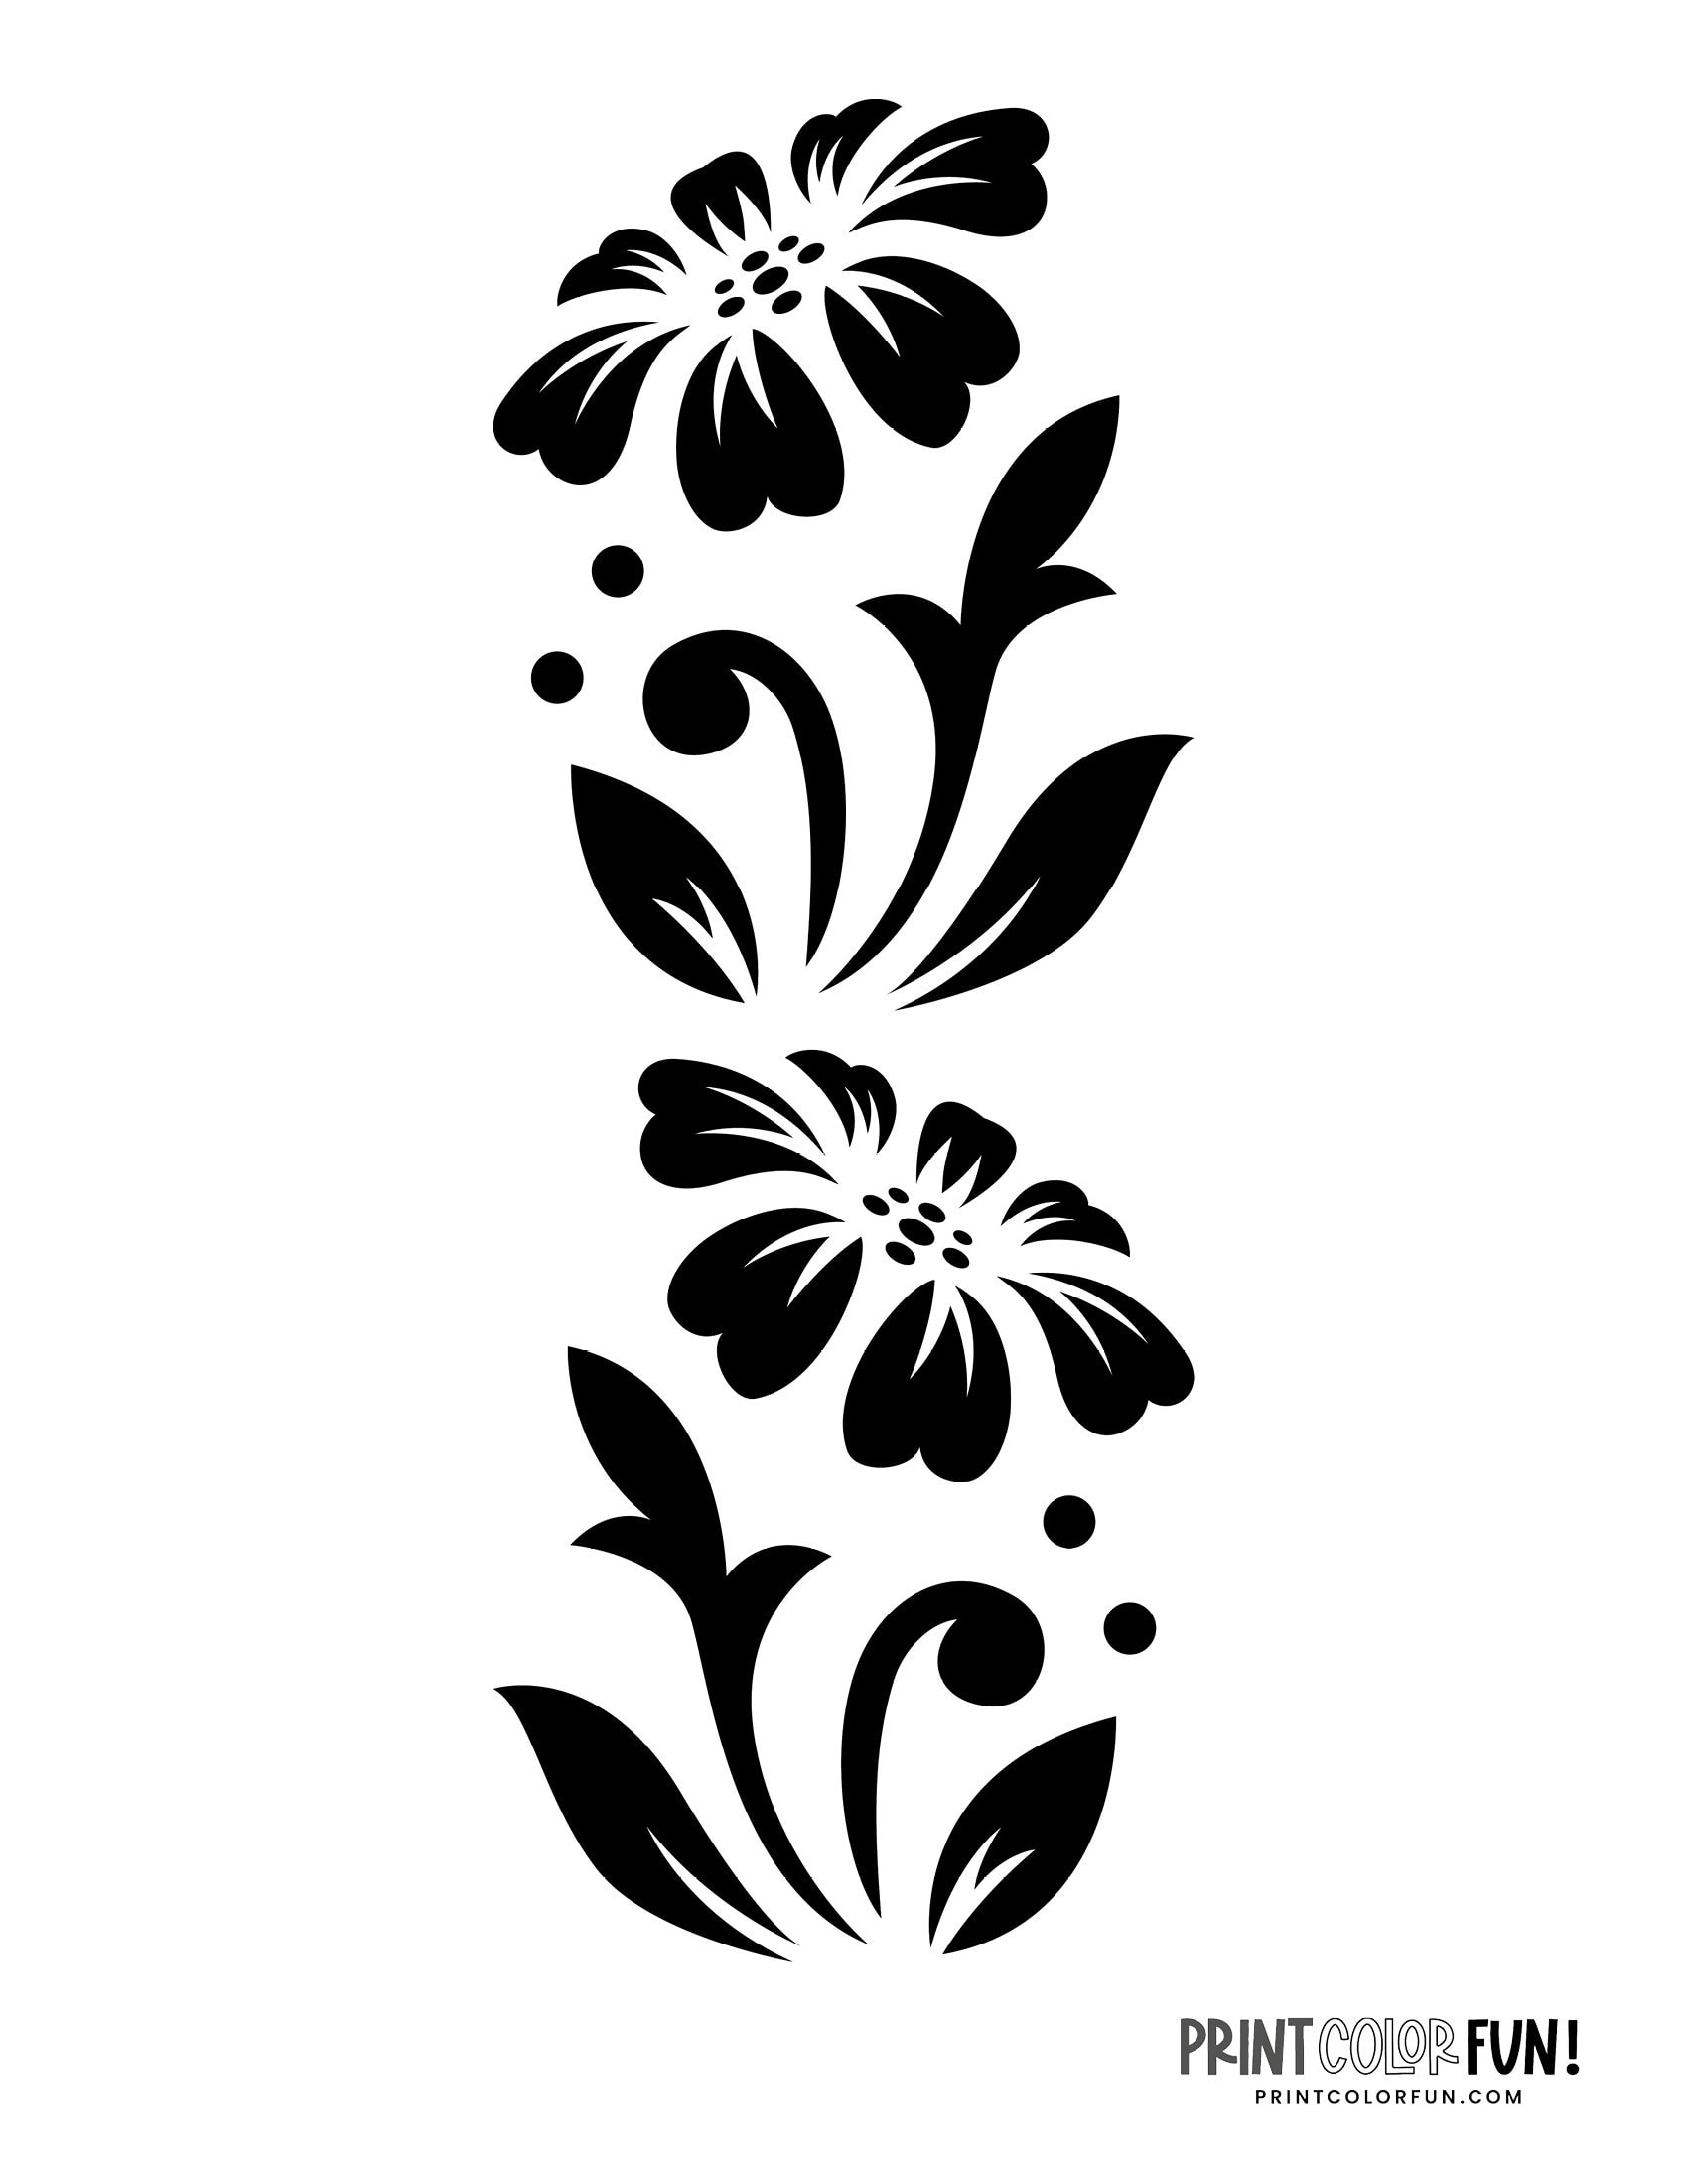 10 free flower stencil designs for printing craft projects at